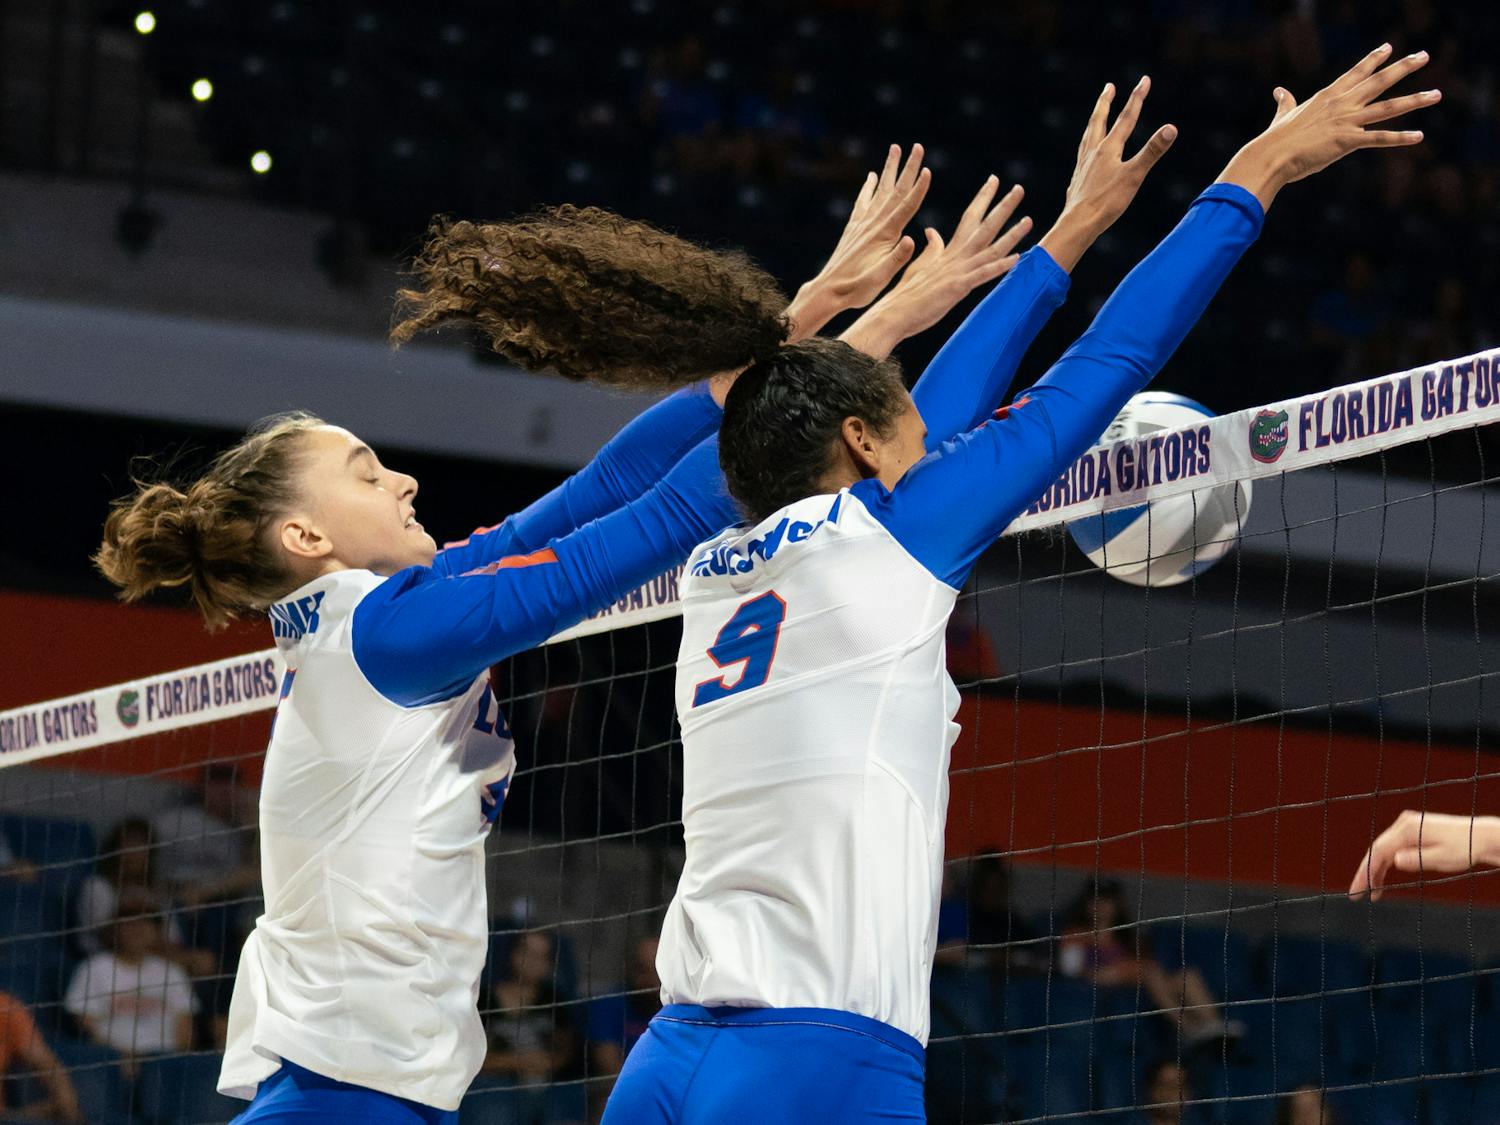 Middle blocker Rachael Kramer (left) and outside hitter Mia Sokolowski (right) figure to be prominent players heading forward for the Gators. Kramer racked up 16 kills during the Gator Invitational. Sokolowski has 35 kills this season in a reserve role.   